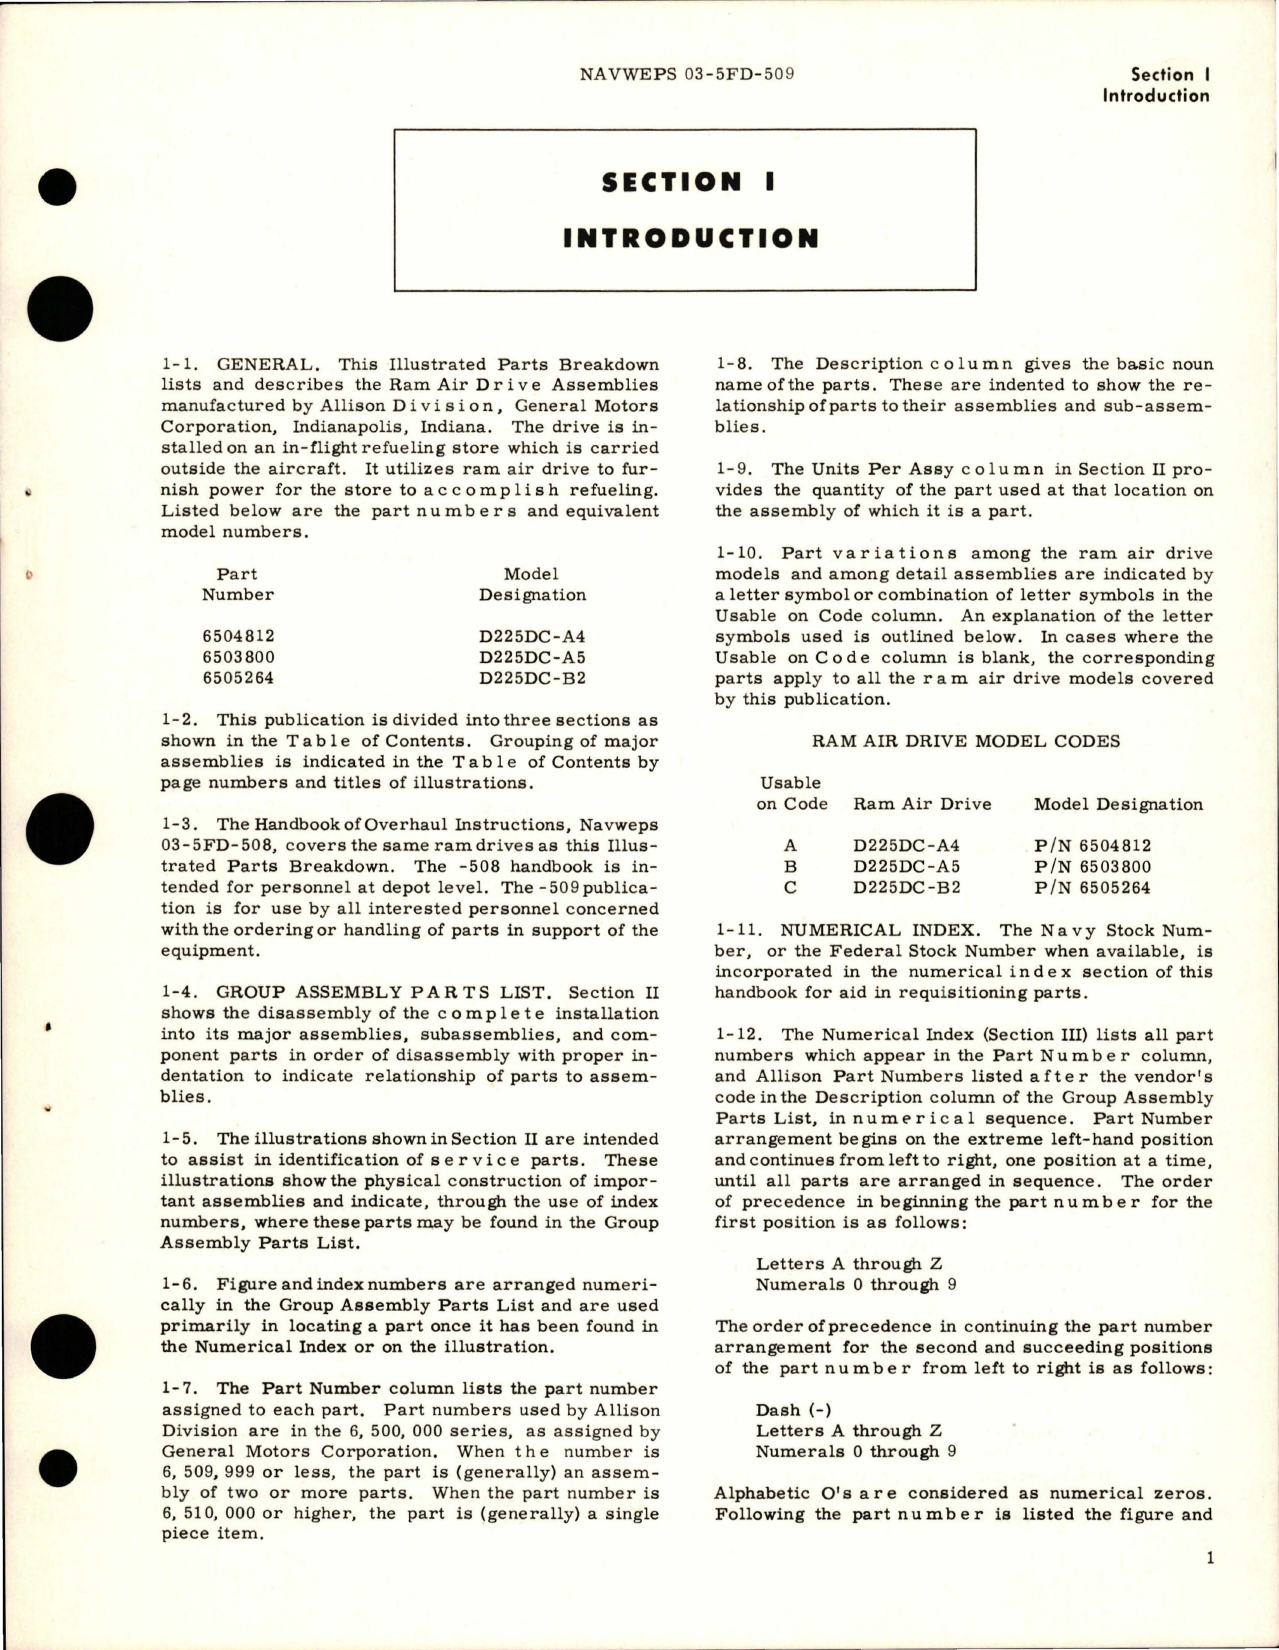 Sample page 5 from AirCorps Library document: Illustrated Parts Breakdown for Ram Air Drive Assembly - Parts 6504812, 6503800, and 6505264 